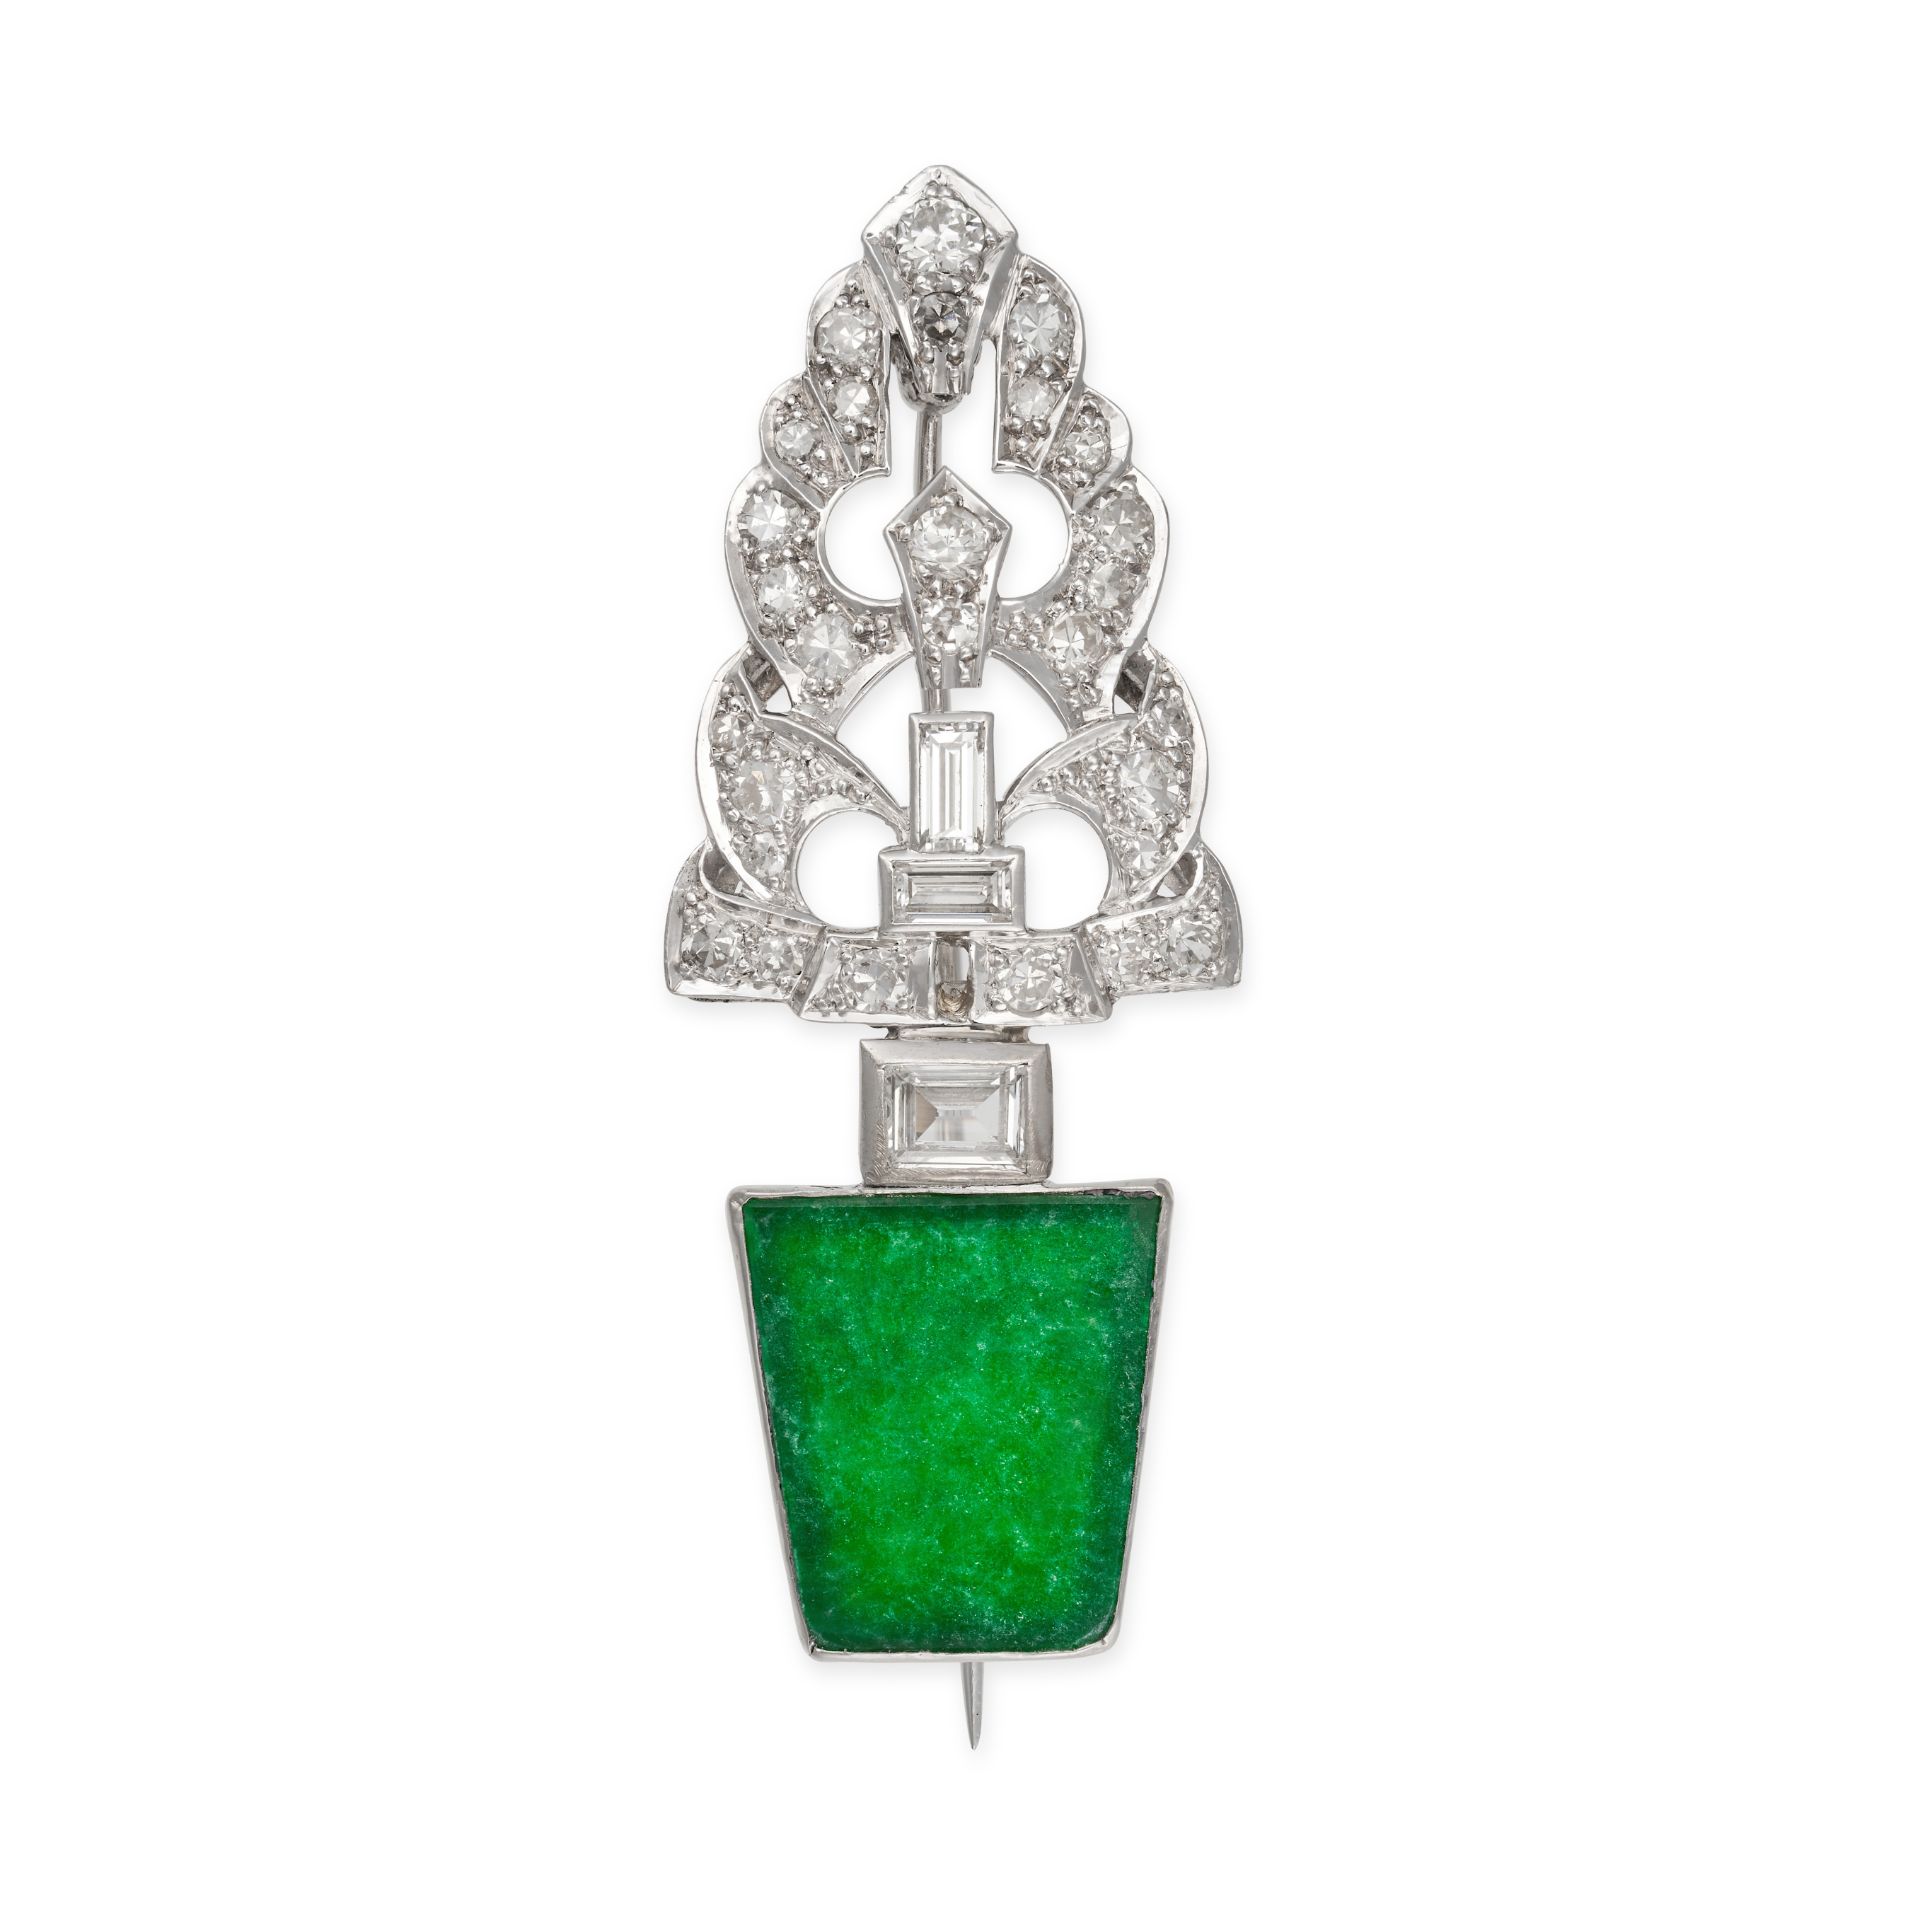 A JADEITE JADE AND DIAMOND PLANT BROOCH in platinum, designed as a plant in a pot, the pot set wi...